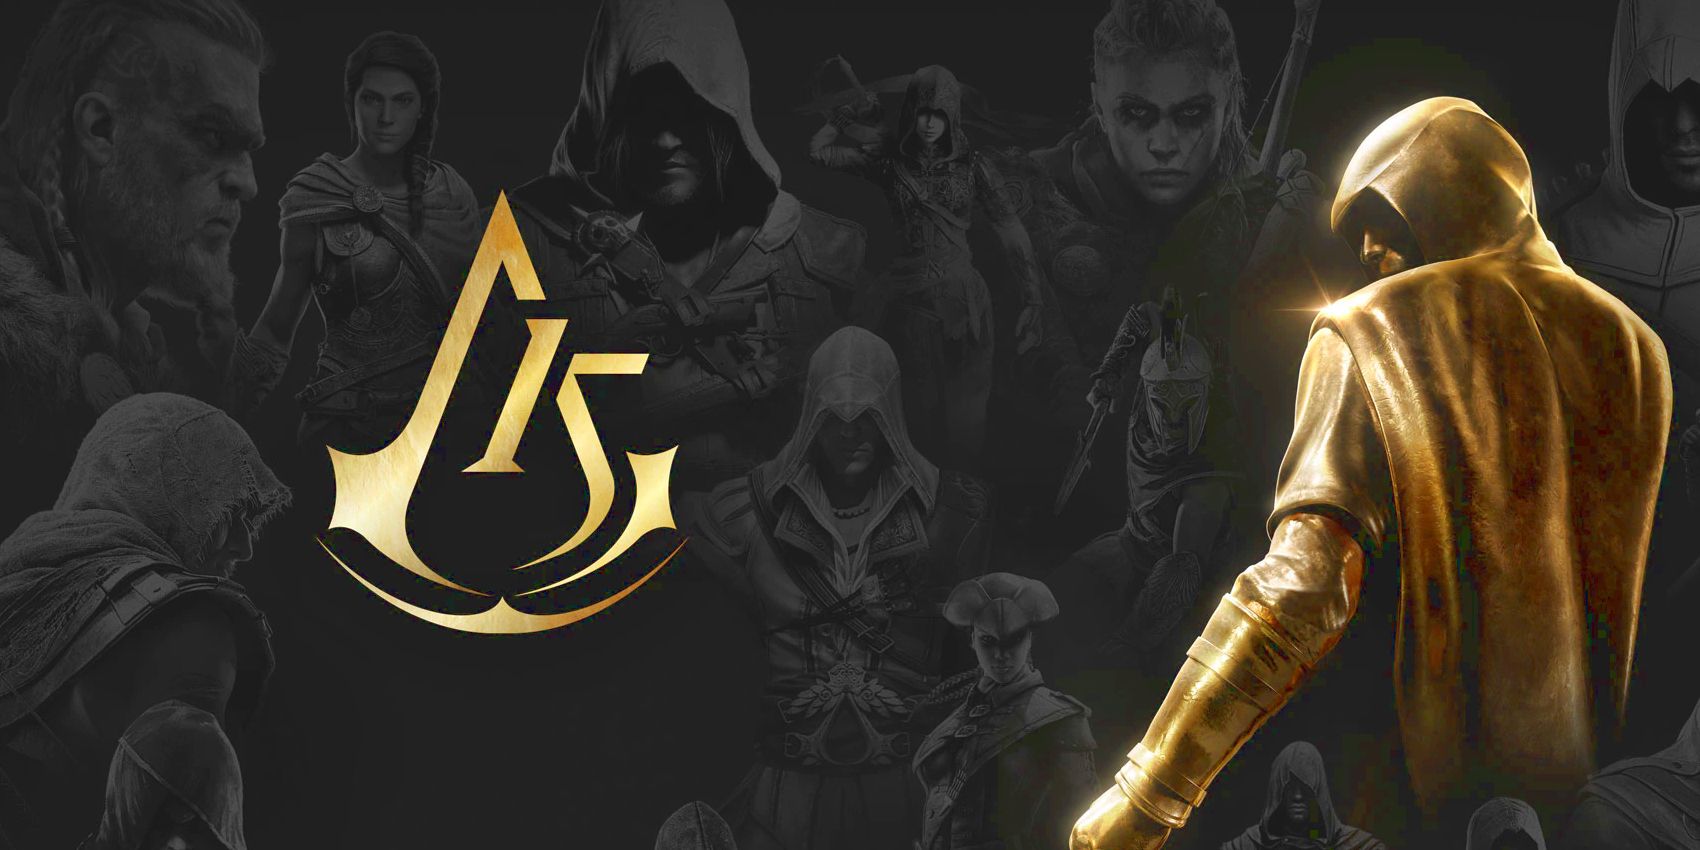 Many Assassin's Creed protagonists are seen standing behind the series logo with a 15 shaped into it while one golden Assassin is seen on the images right side.